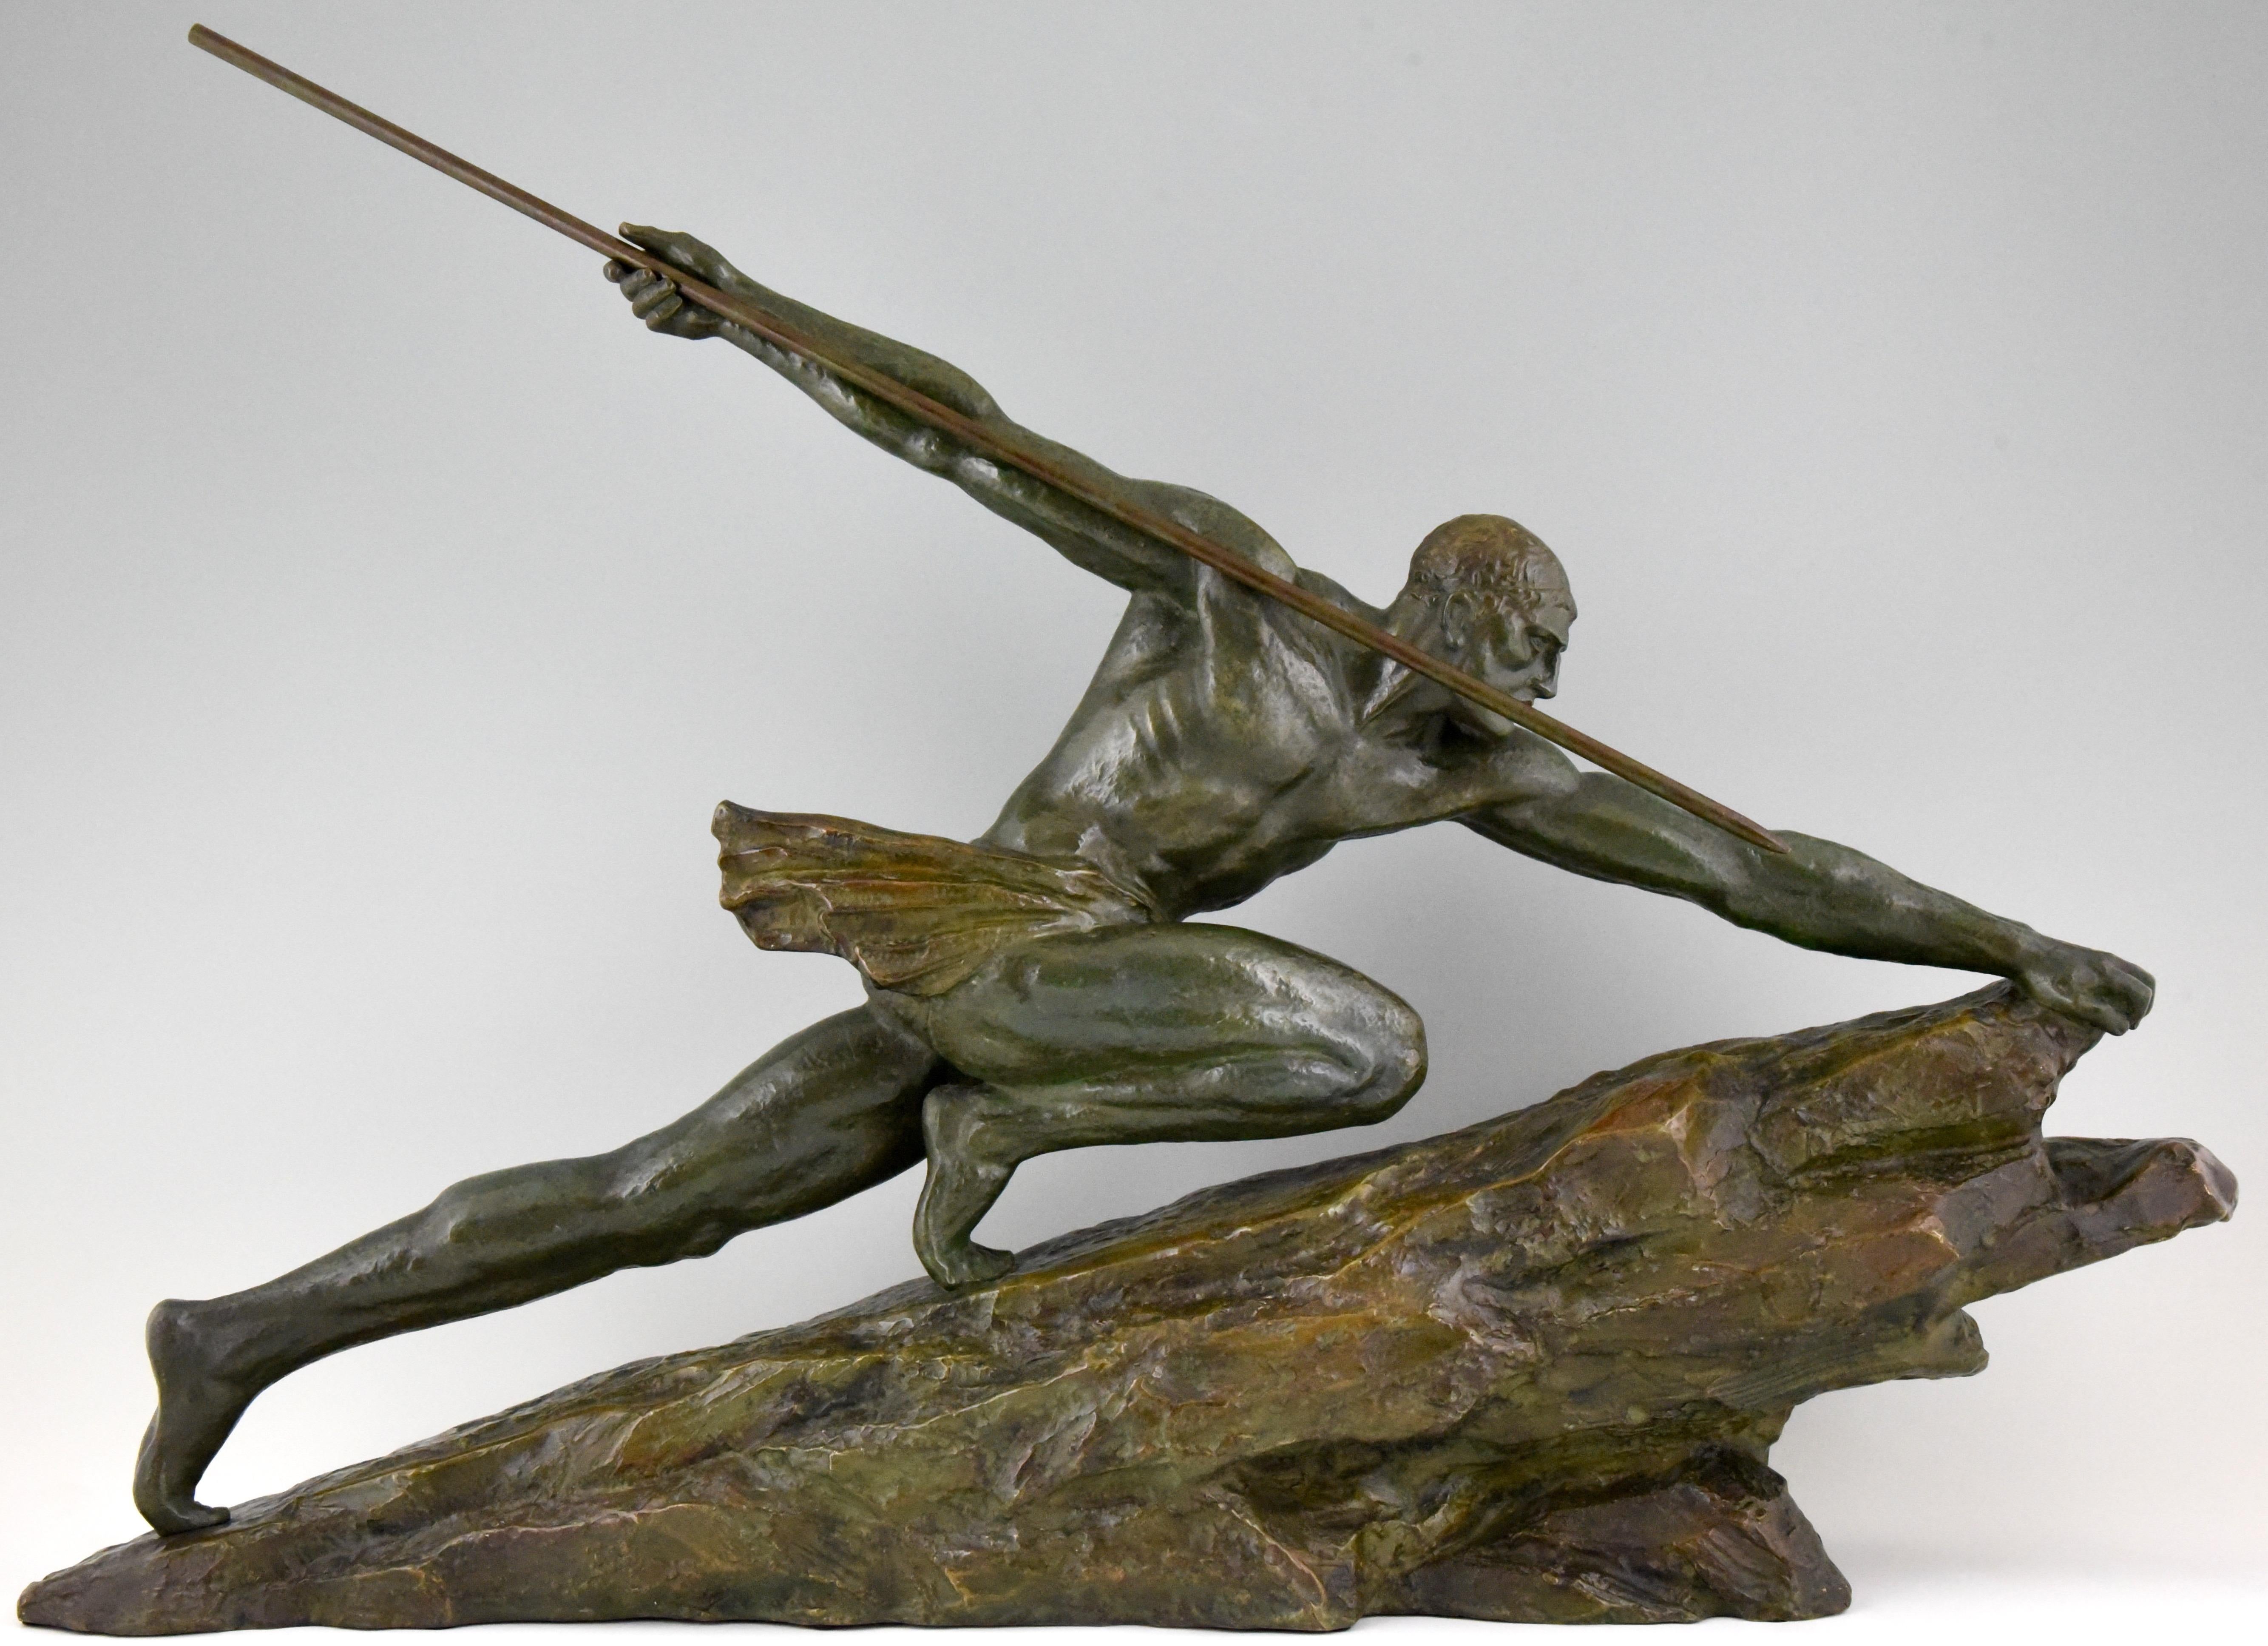 “One chance” Impressive Art Deco bronze sculpture of a man on a rock throwing a spear, signed P. Le Faguays, France, 1927. Lovely green patina.
This model is illustrated in the book 
?“Bronzes, sculptors and founders” H. Berman, Abage. ?Page 425